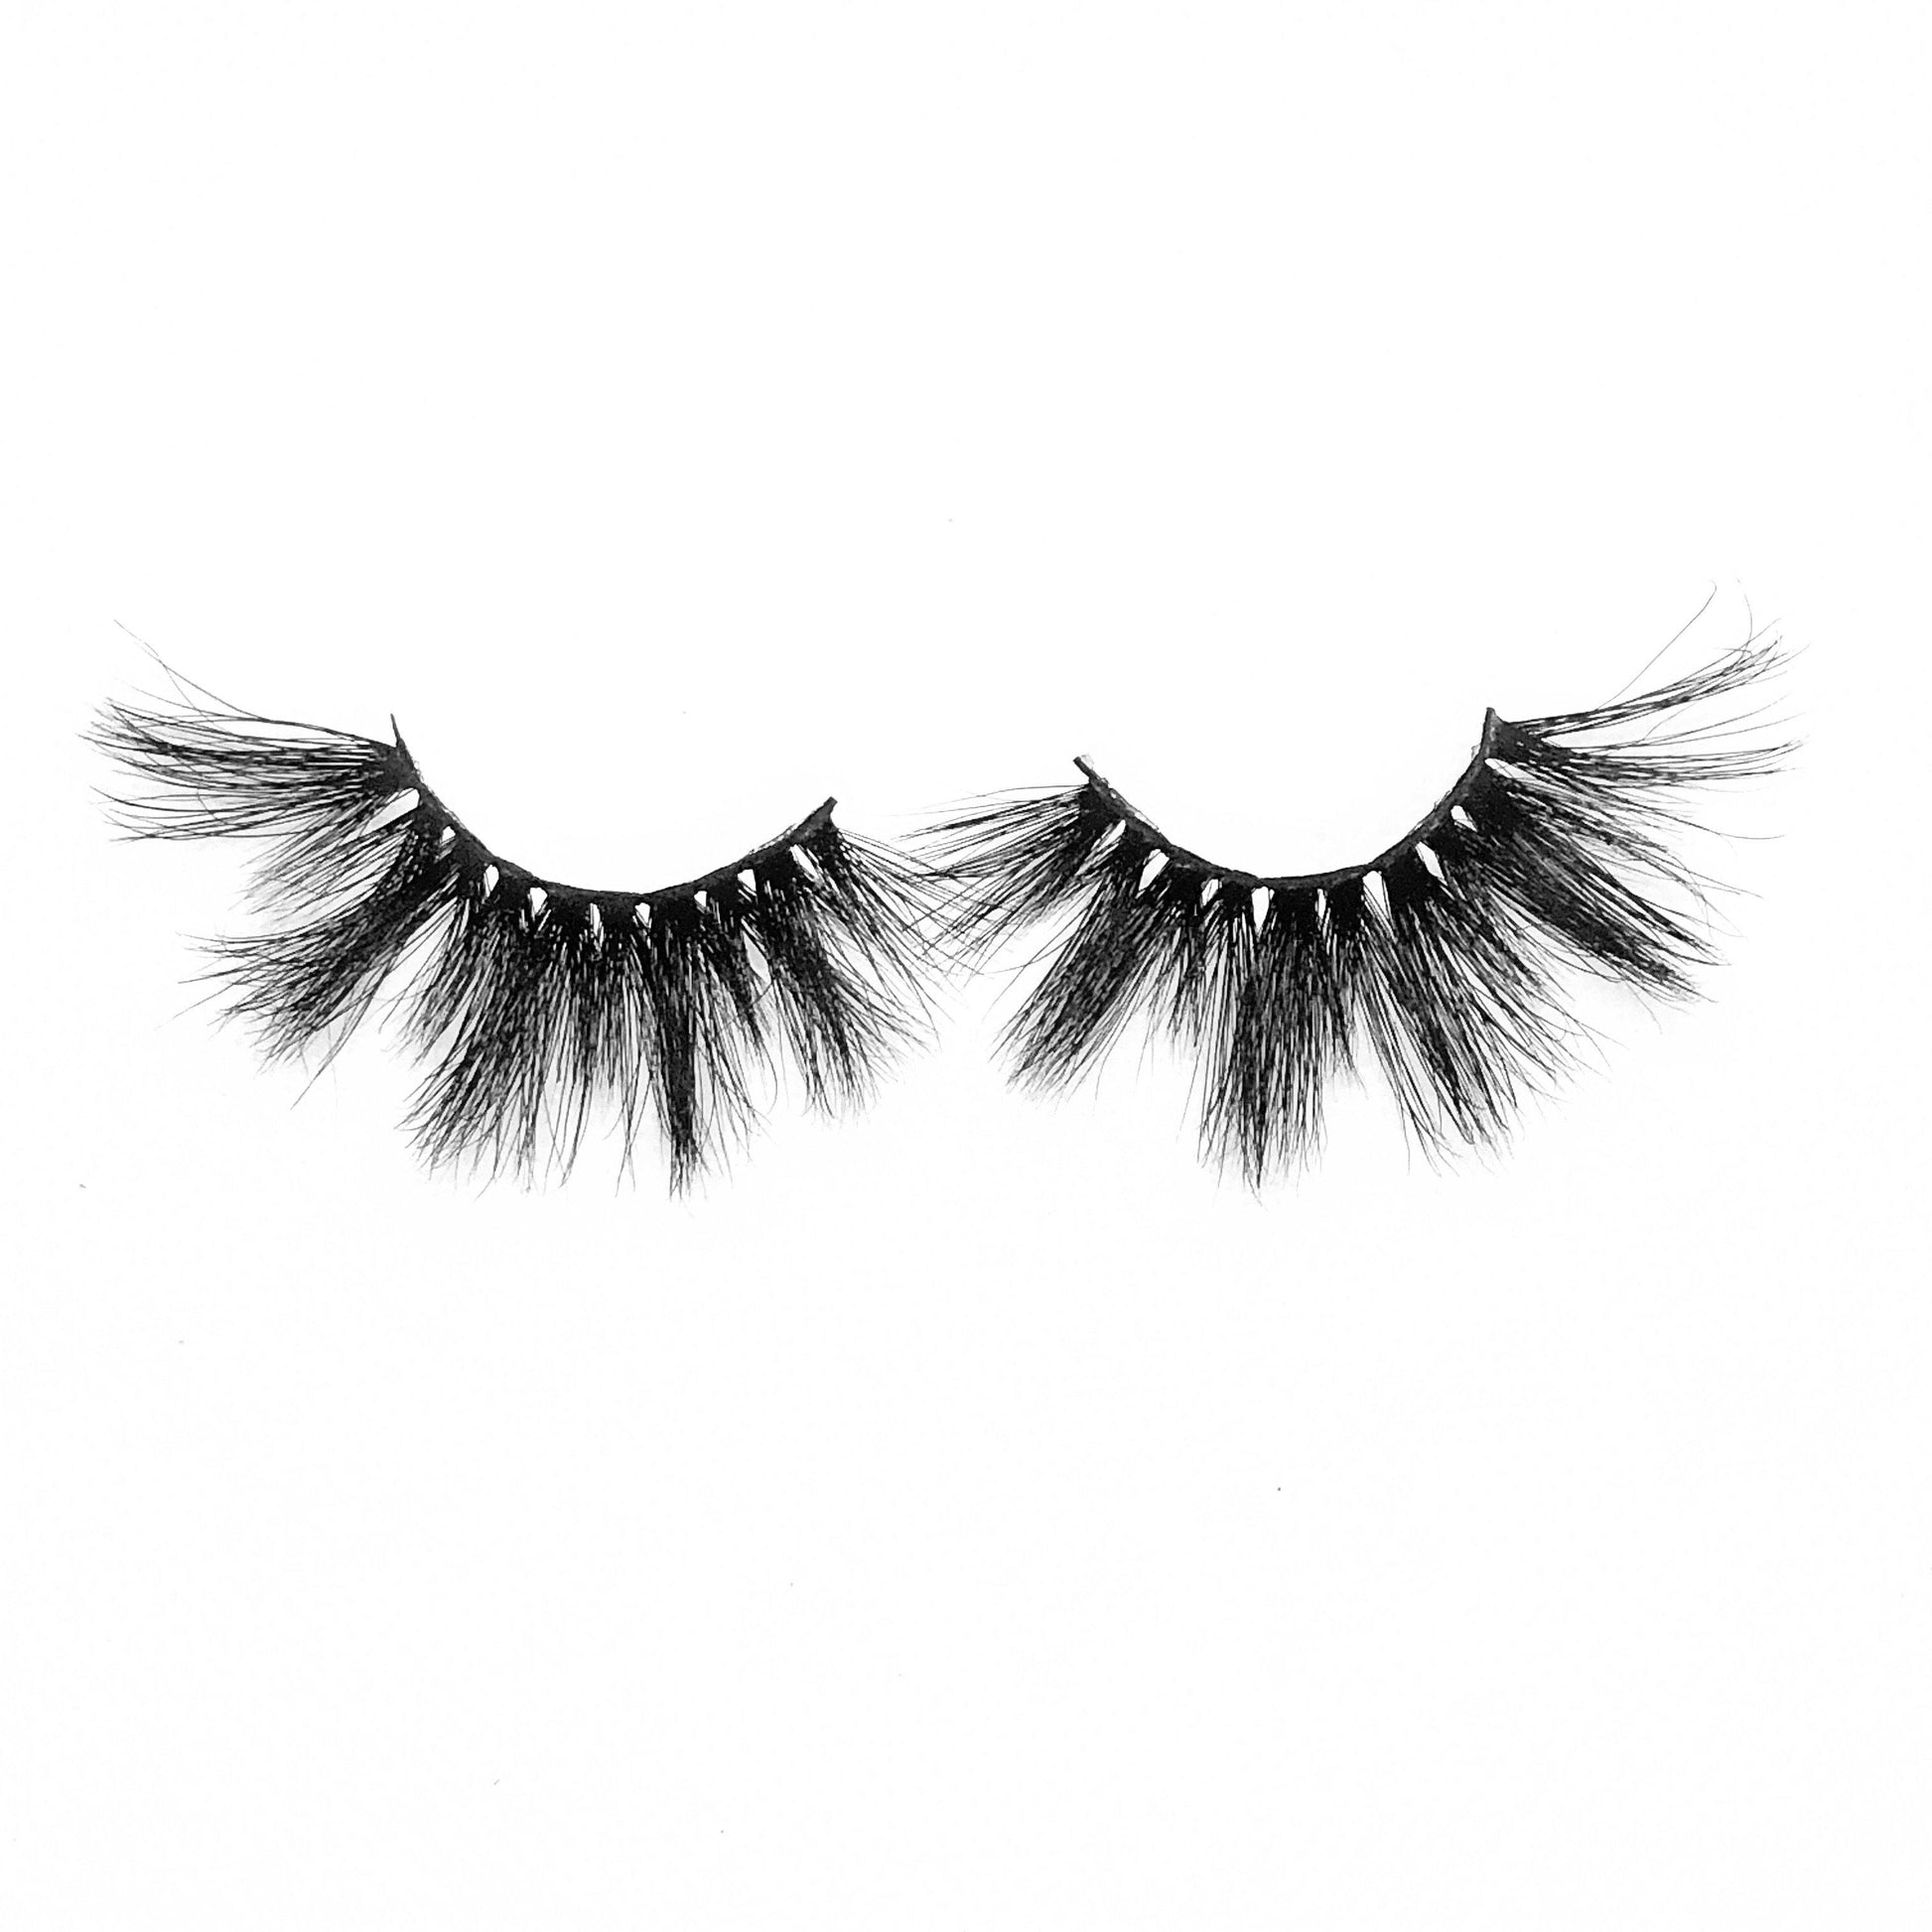 Alpha Femme (3-Pack)-Mega Volume-This set includes (3) 25mm mink lashes: Cardi Chyna Koriyan Description Handmade, Cruelty-Free, Wear up to 30x Material: 100% Mink Band: Black Cotton Band Volume:Mega Volume Style: Extra Long, Dramatic, Wipsy To Use: Measure and size your lashes by placing the false lash against your lash line where your natural lashes start. Using Mini Scissors, cut off the excess lash band length from the outer corners to ensure they fit properly. Apply a layer of Lash Adhesive